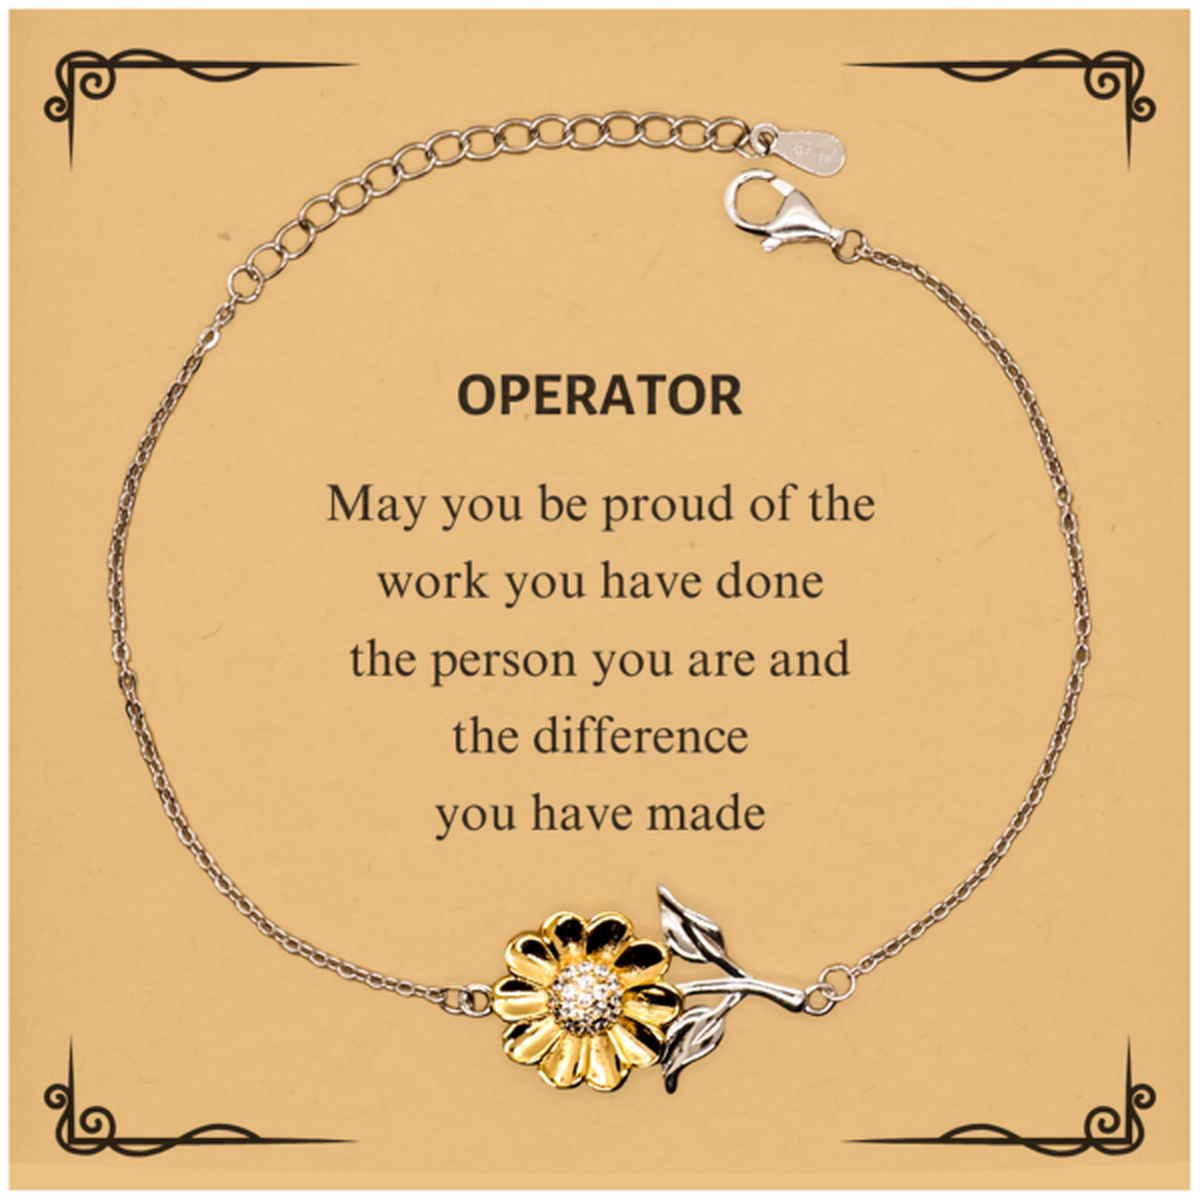 Operator May you be proud of the work you have done, Retirement Operator Sunflower Bracelet for Colleague Appreciation Gifts Amazing for Operator